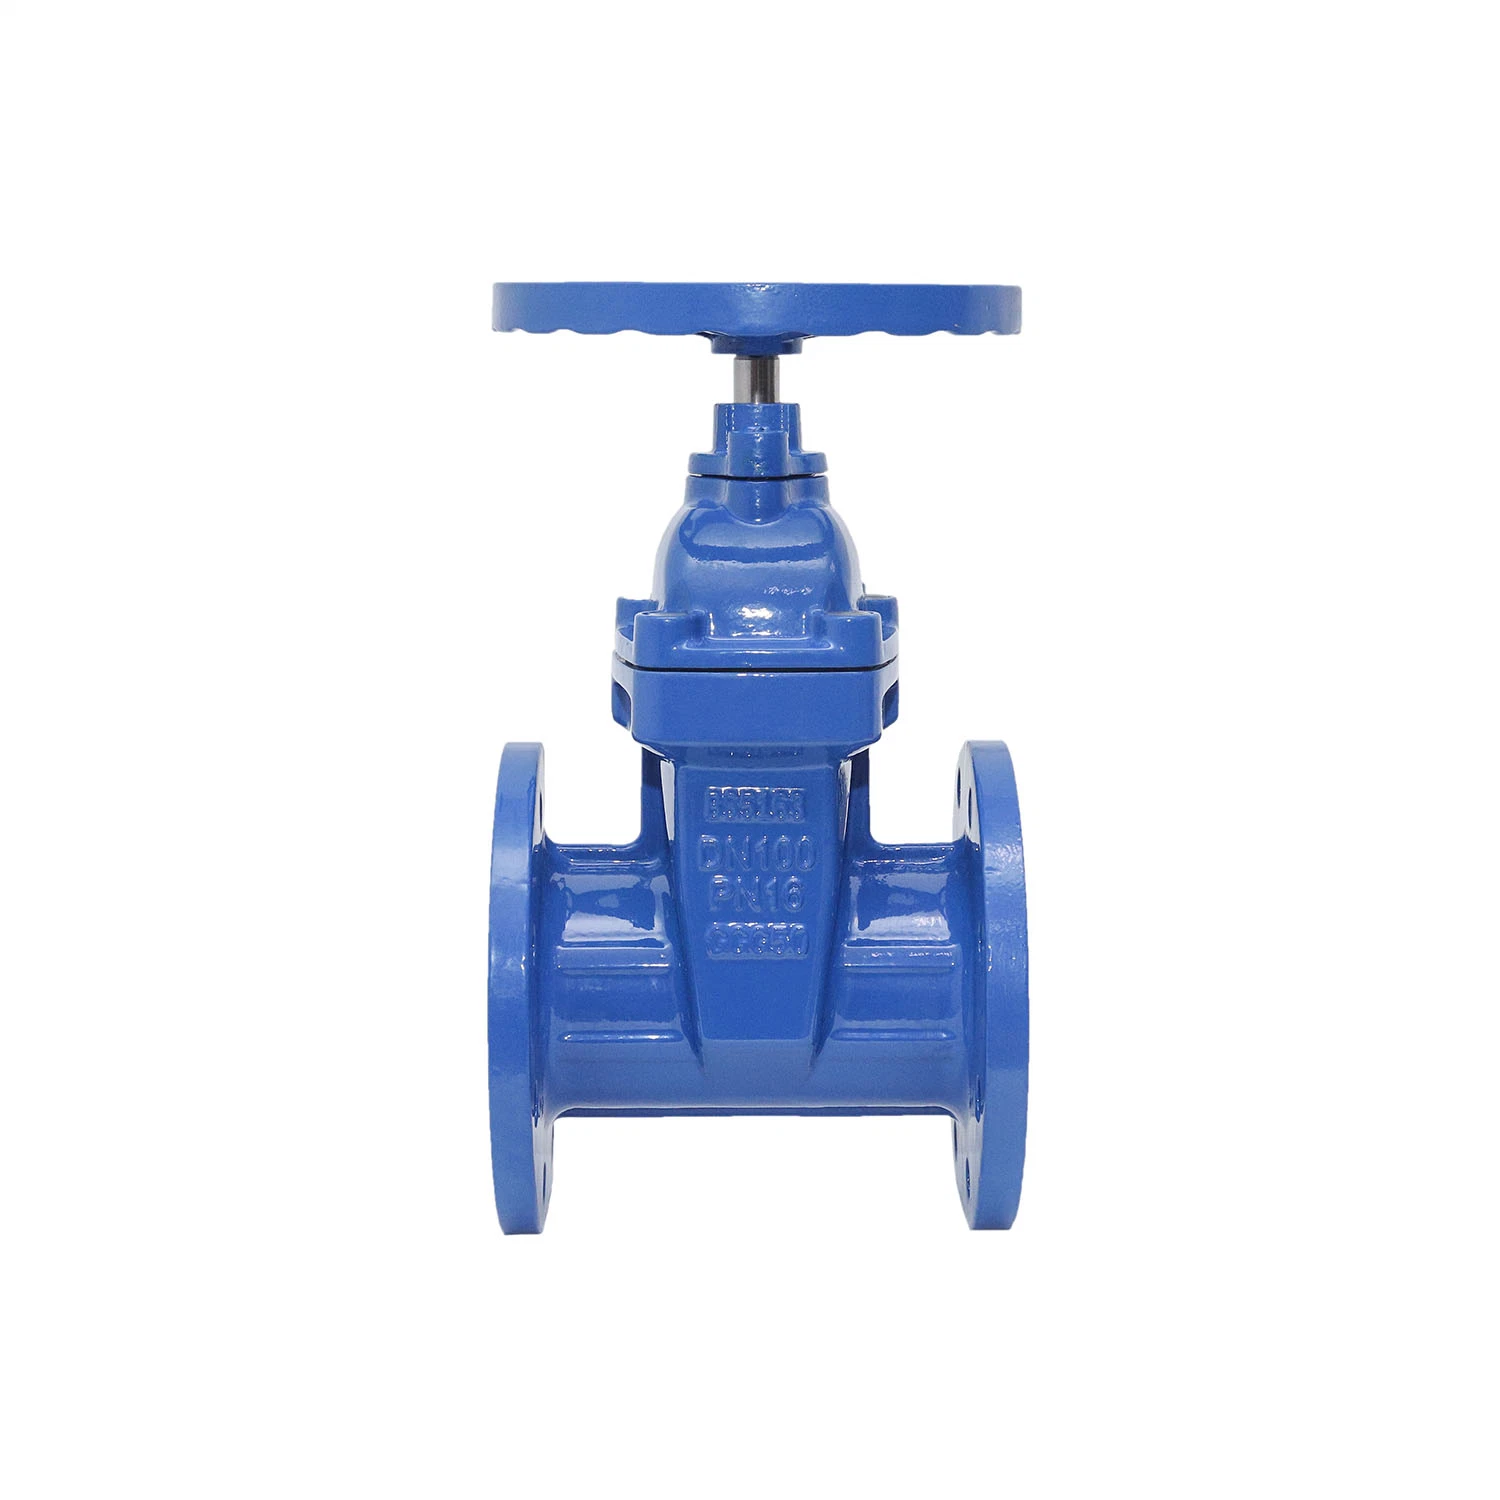 16bar Cast Iron Nrs Resilient Seat Wedge Gate Valve